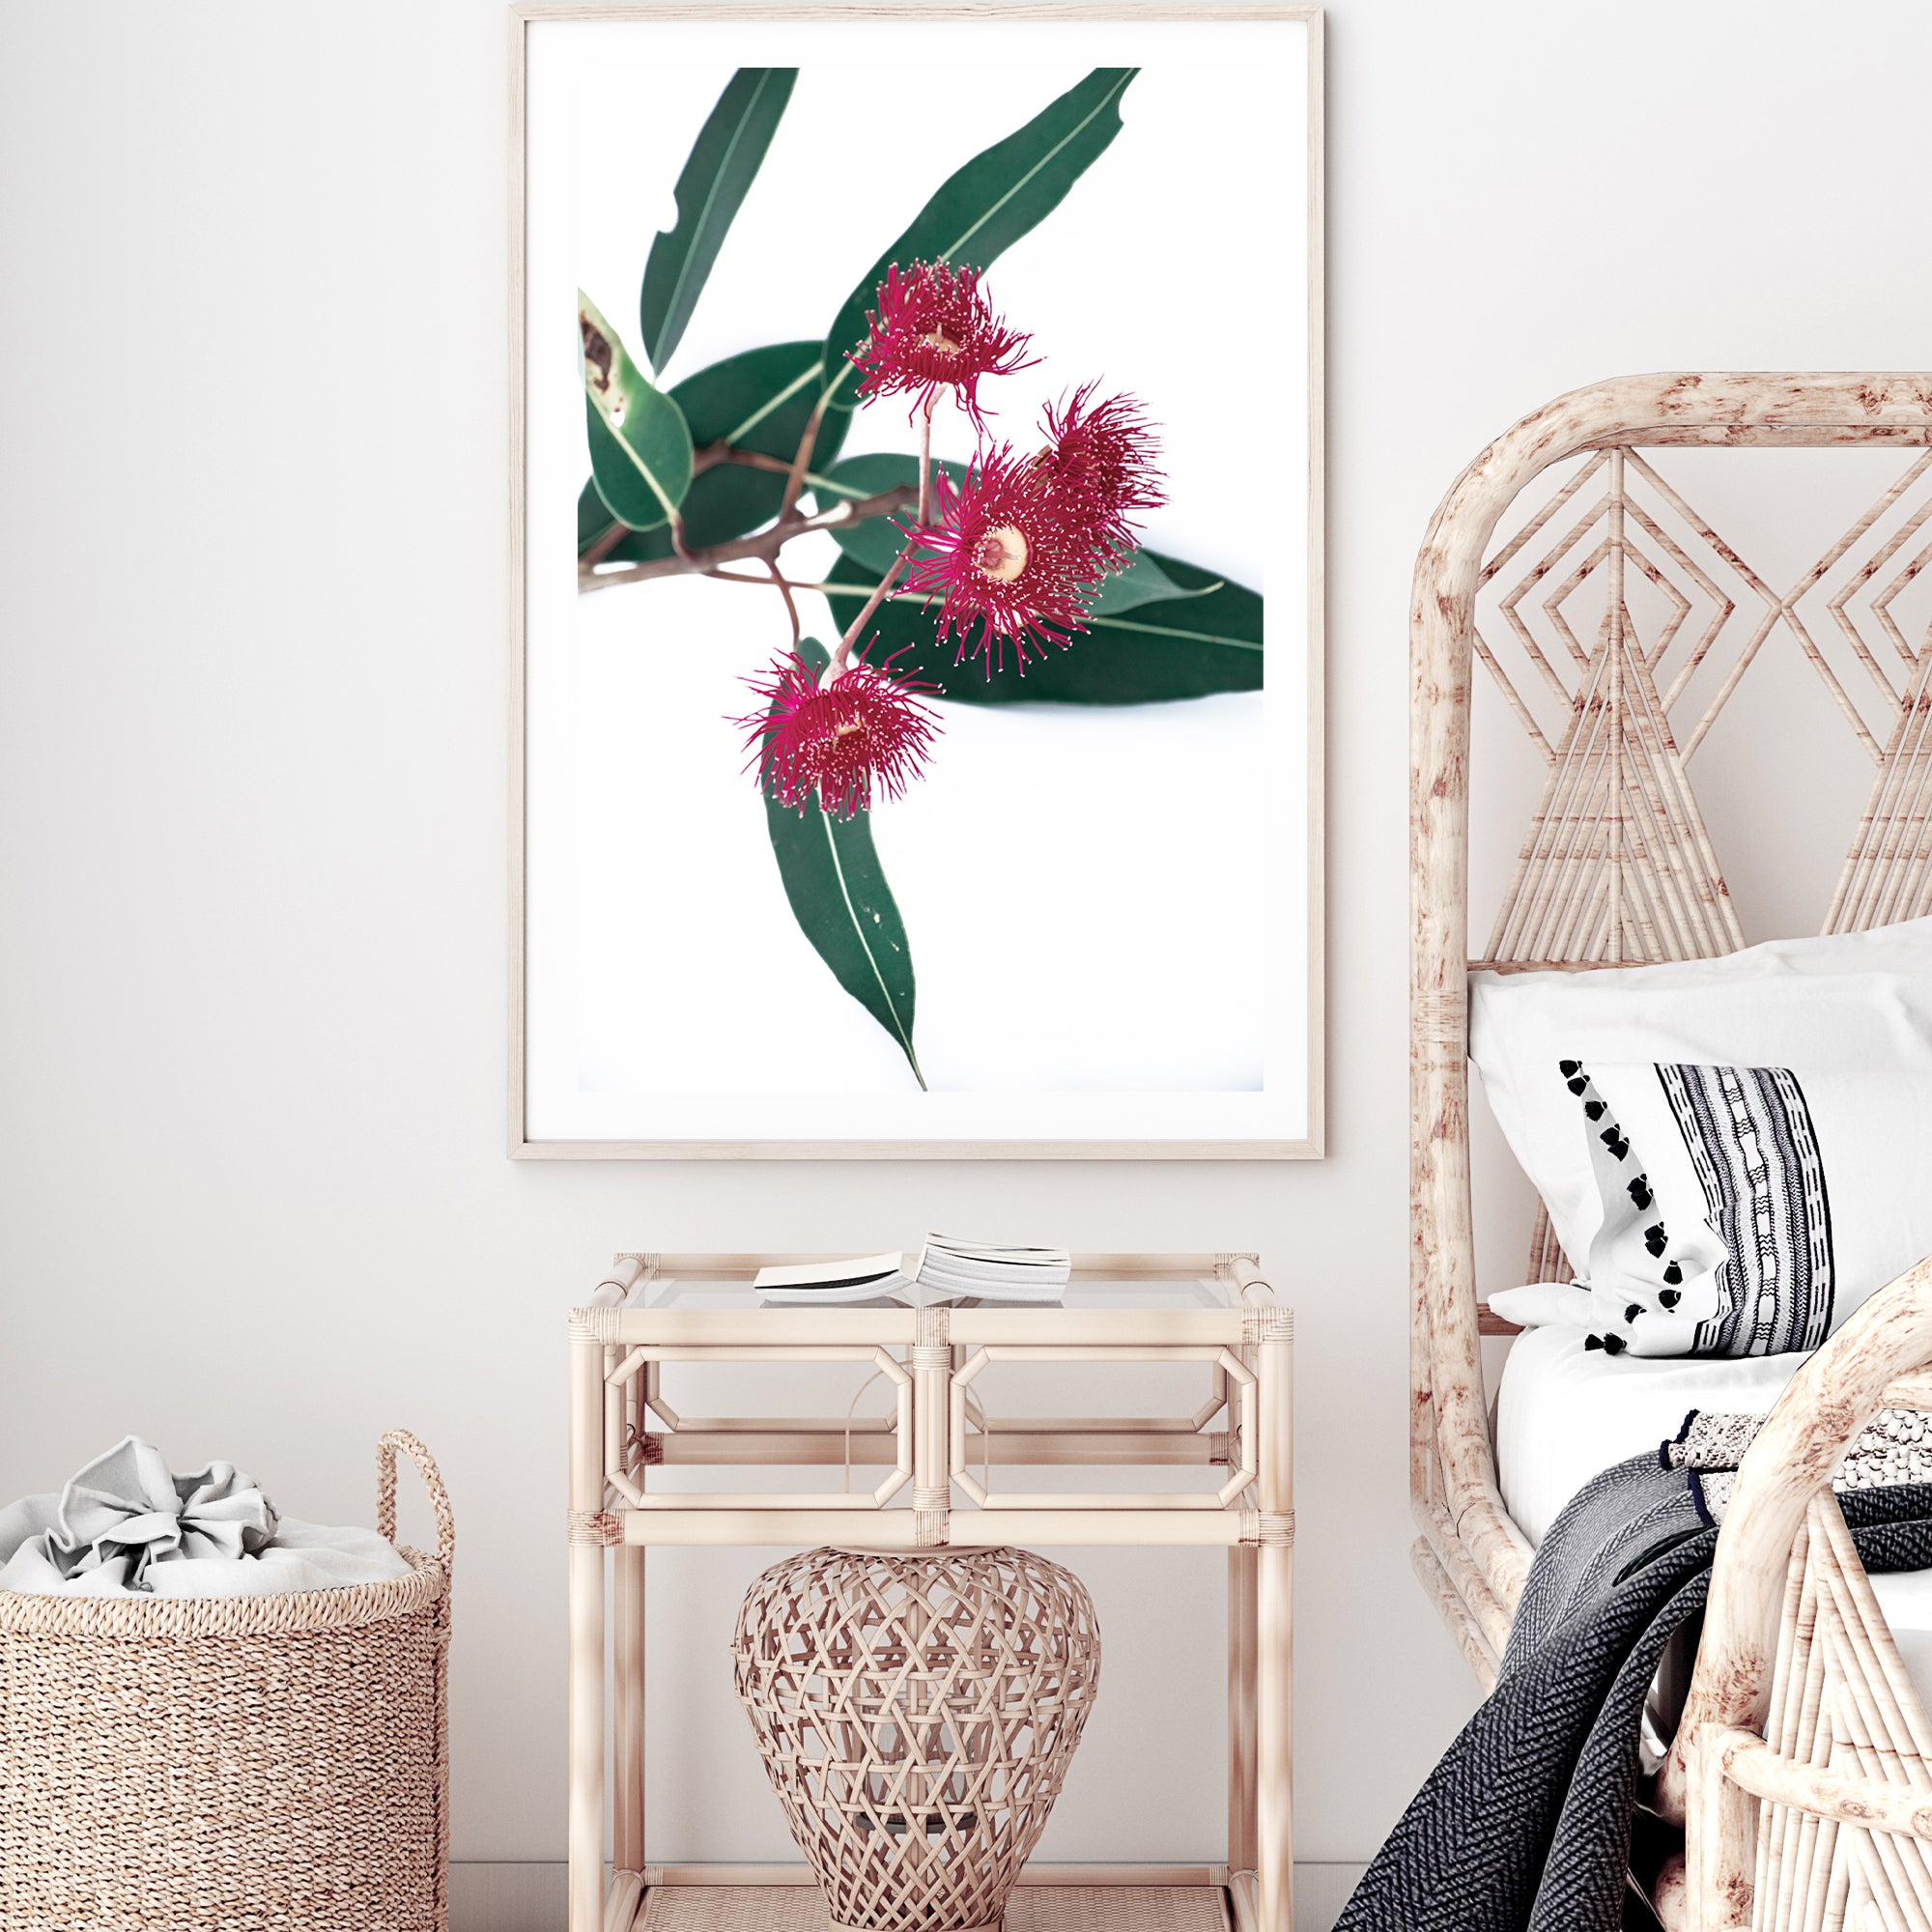 A floral photographic artwork featuring green eucalyptus leaves and beautiful red wild flowers, available framed or unframed.